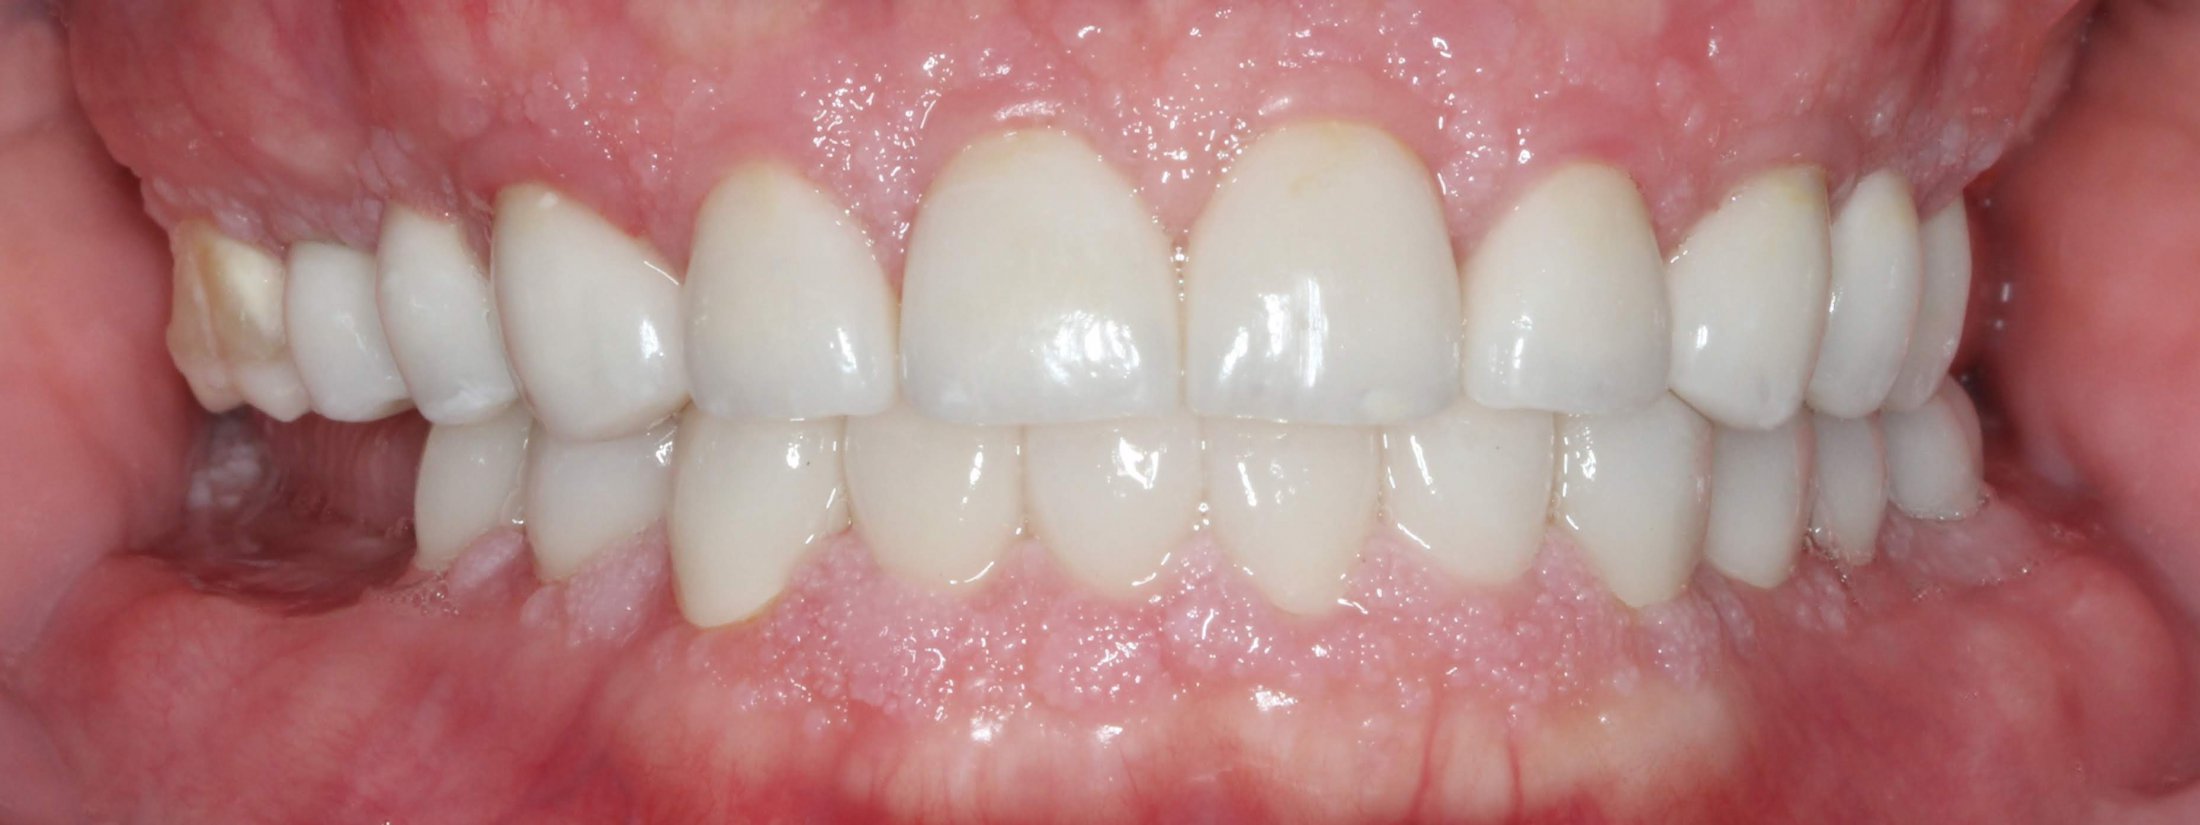 Patient's mouth after smile makeover